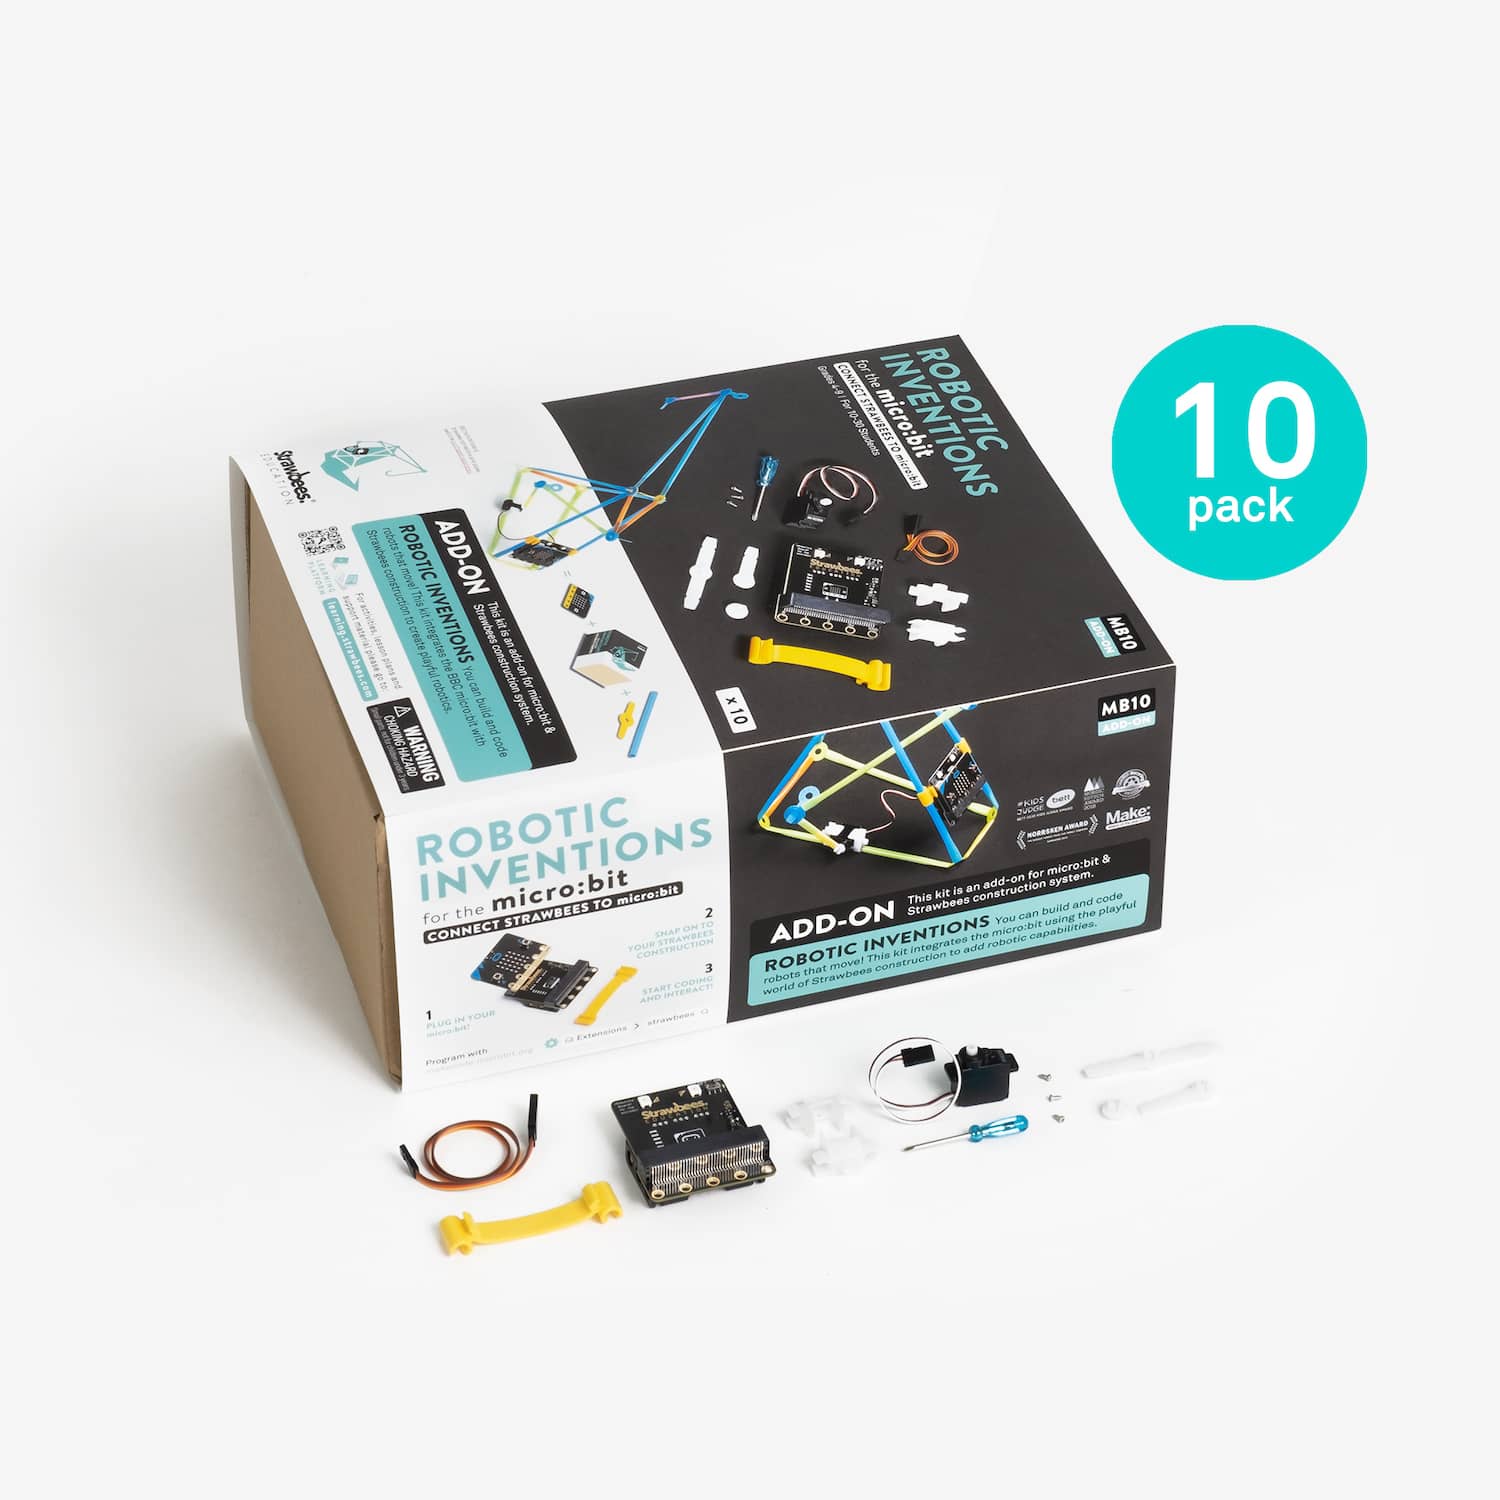 Robotic Inventions for micro:bit - 10 Pack - Strawbees